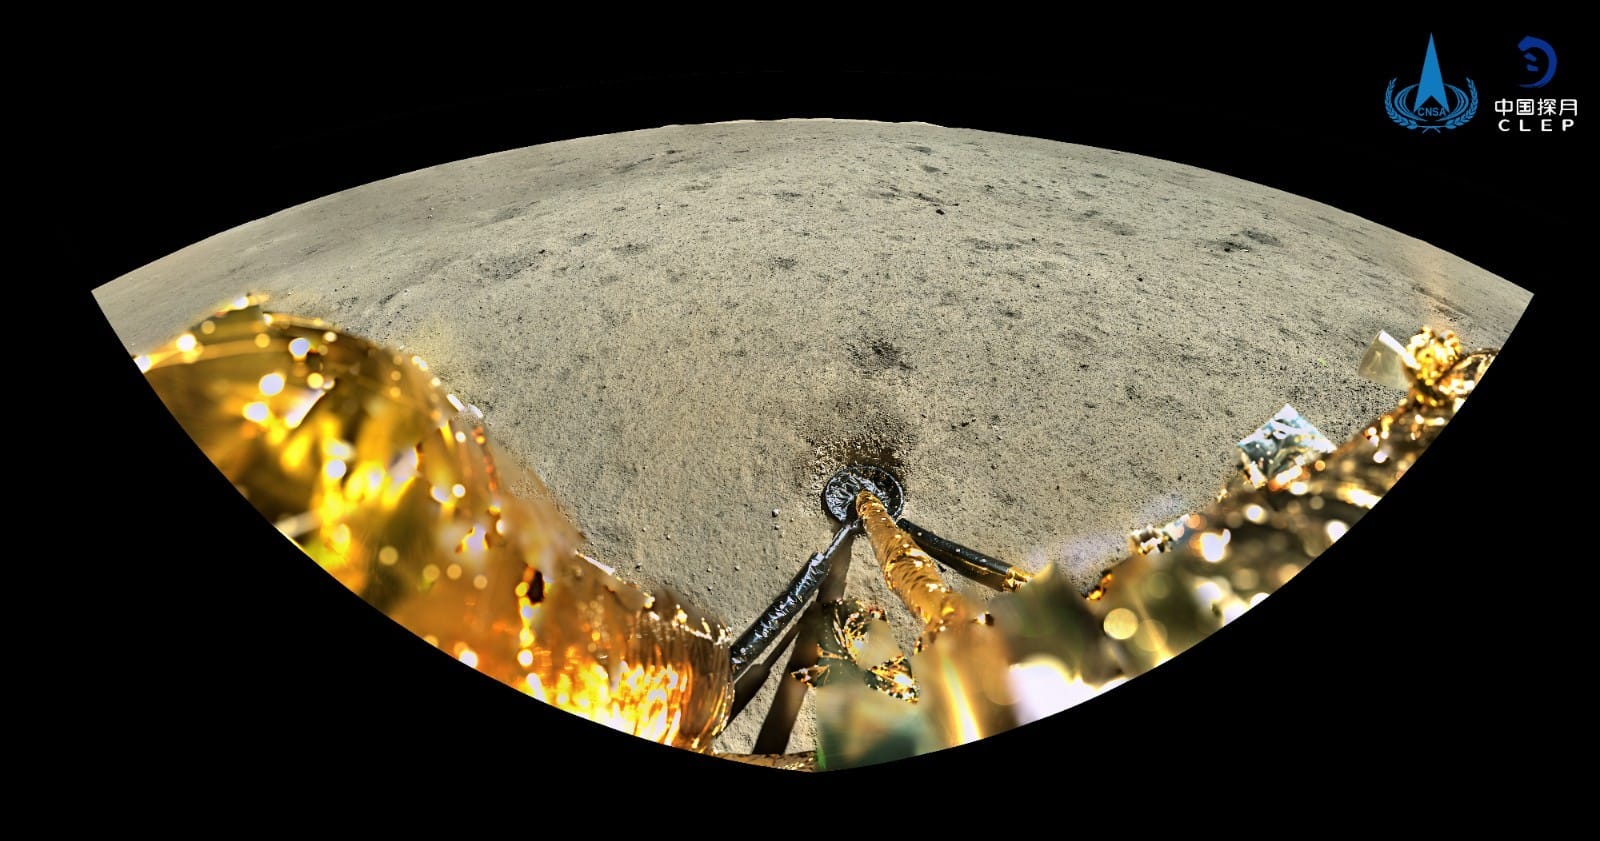 An image of the surface of the Moon's far side captured by the panoramic camera on the lander of Chang'e-6 probe. ©CNSA